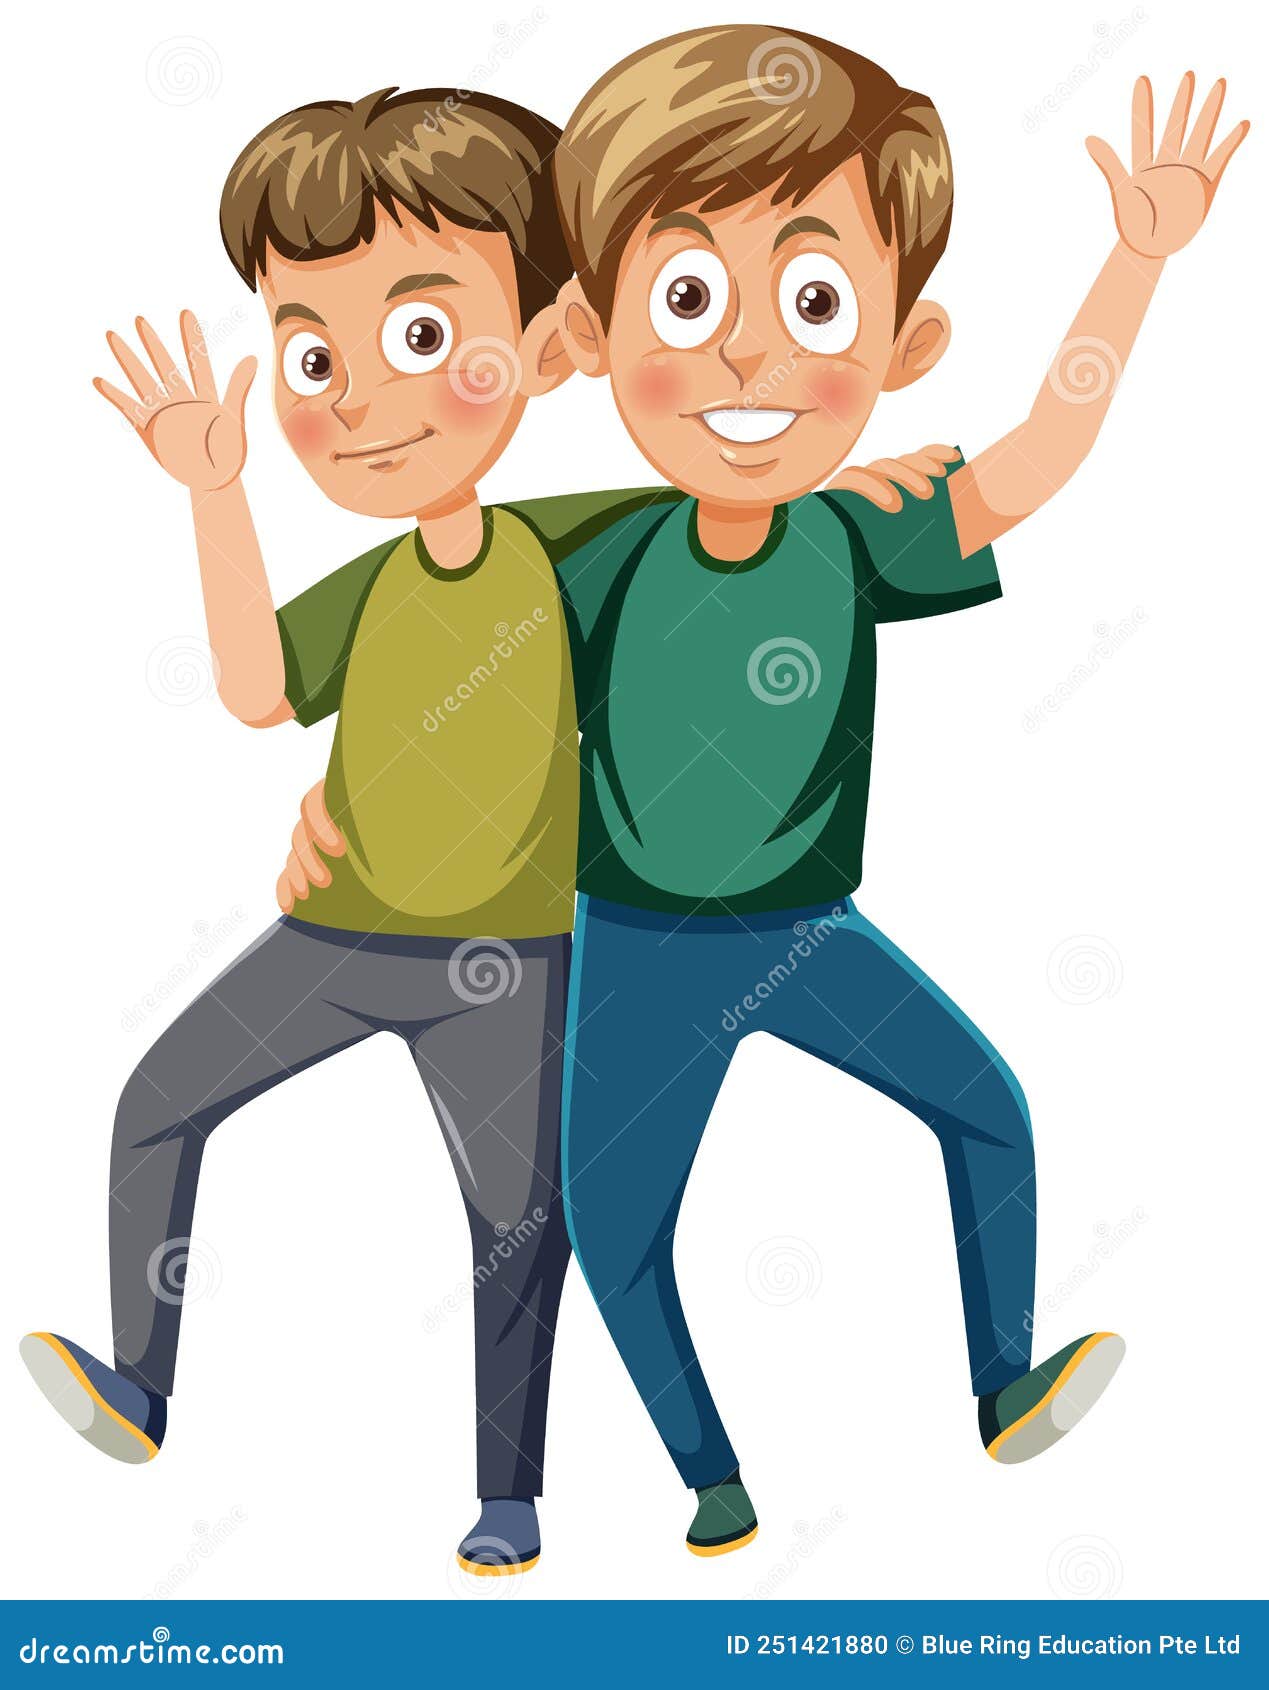 Best Friends Boys Cartoon Character Stock Vector - Illustration of drawing,  child: 251421880